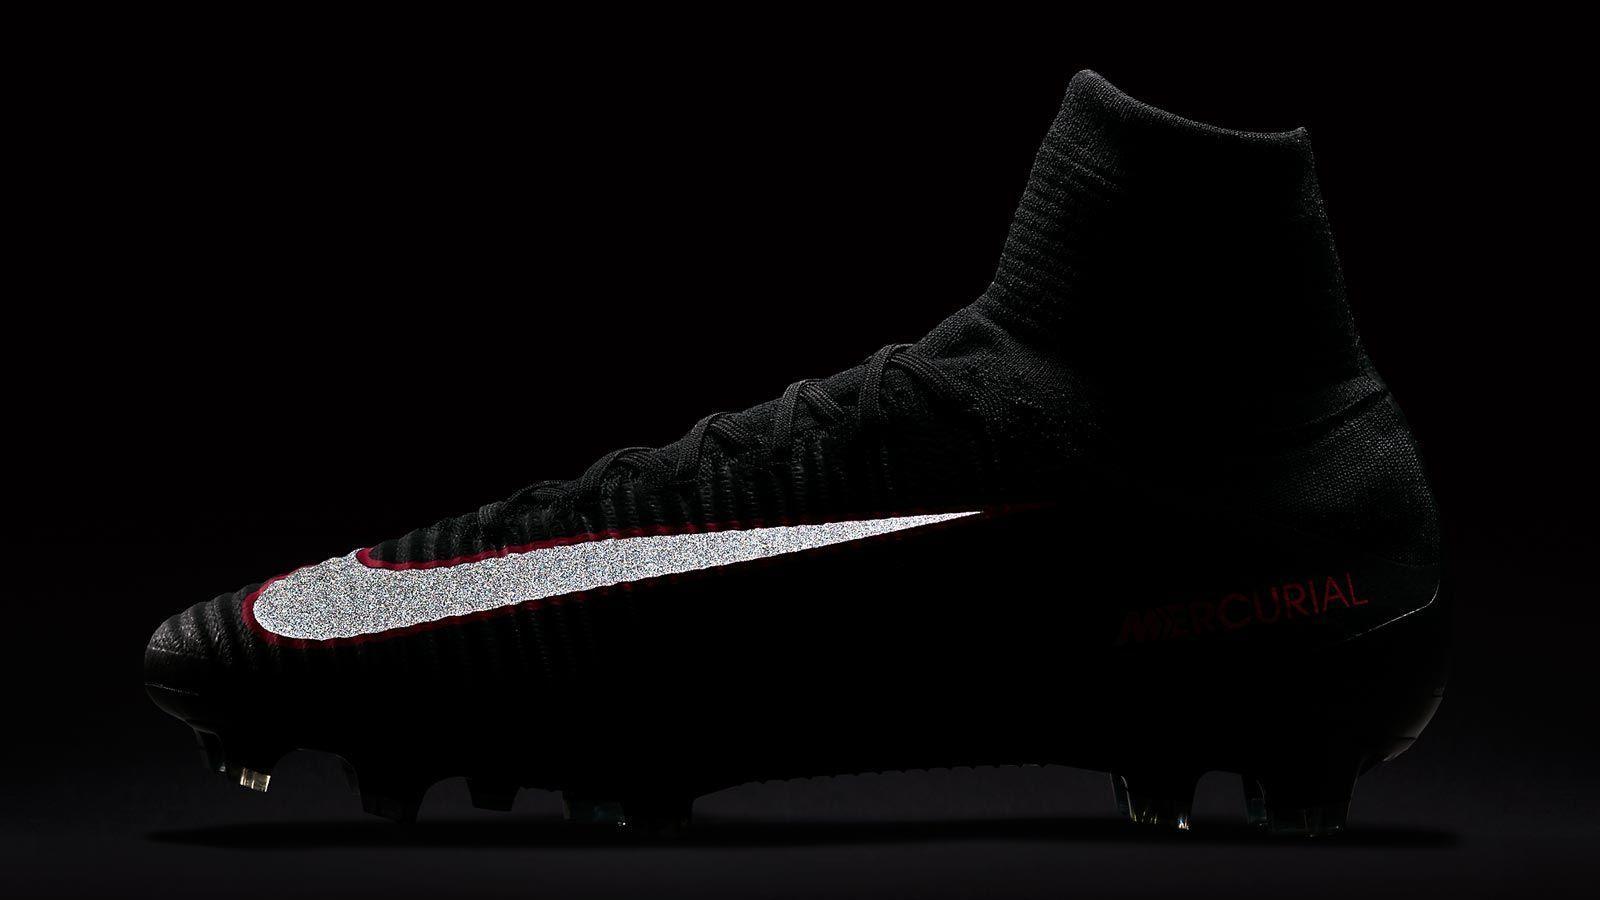 Black / Pink Nike Mercurial Superfly V 2016 2017 Boots Revealed